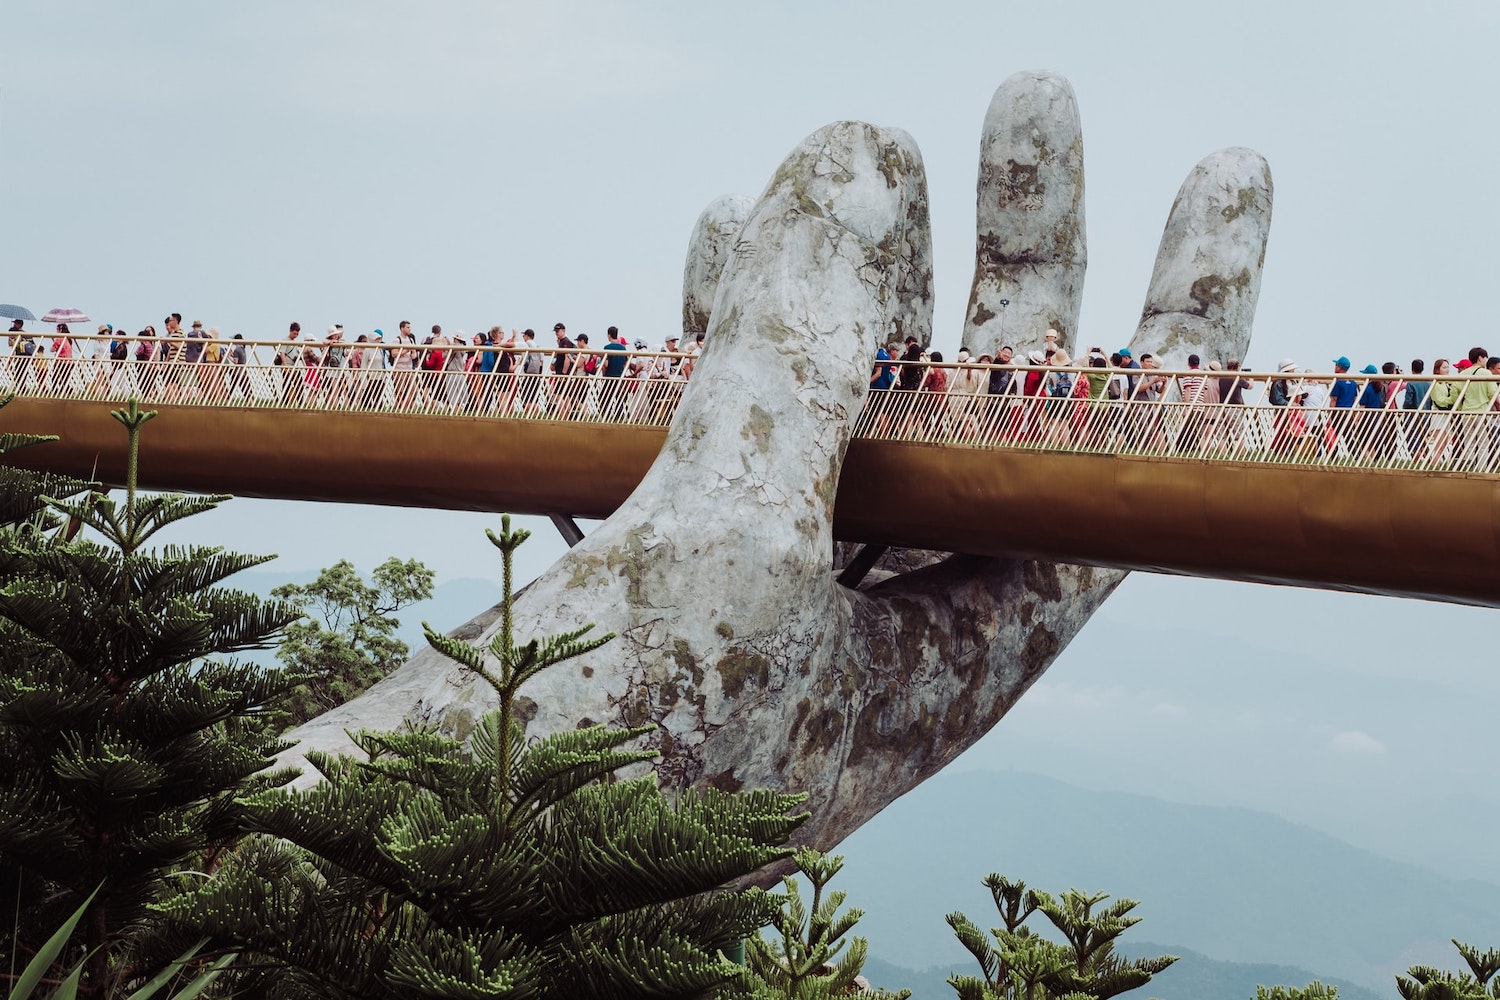 Hand Golden bridge in Vietnam on a cloudy day with lots on tourists